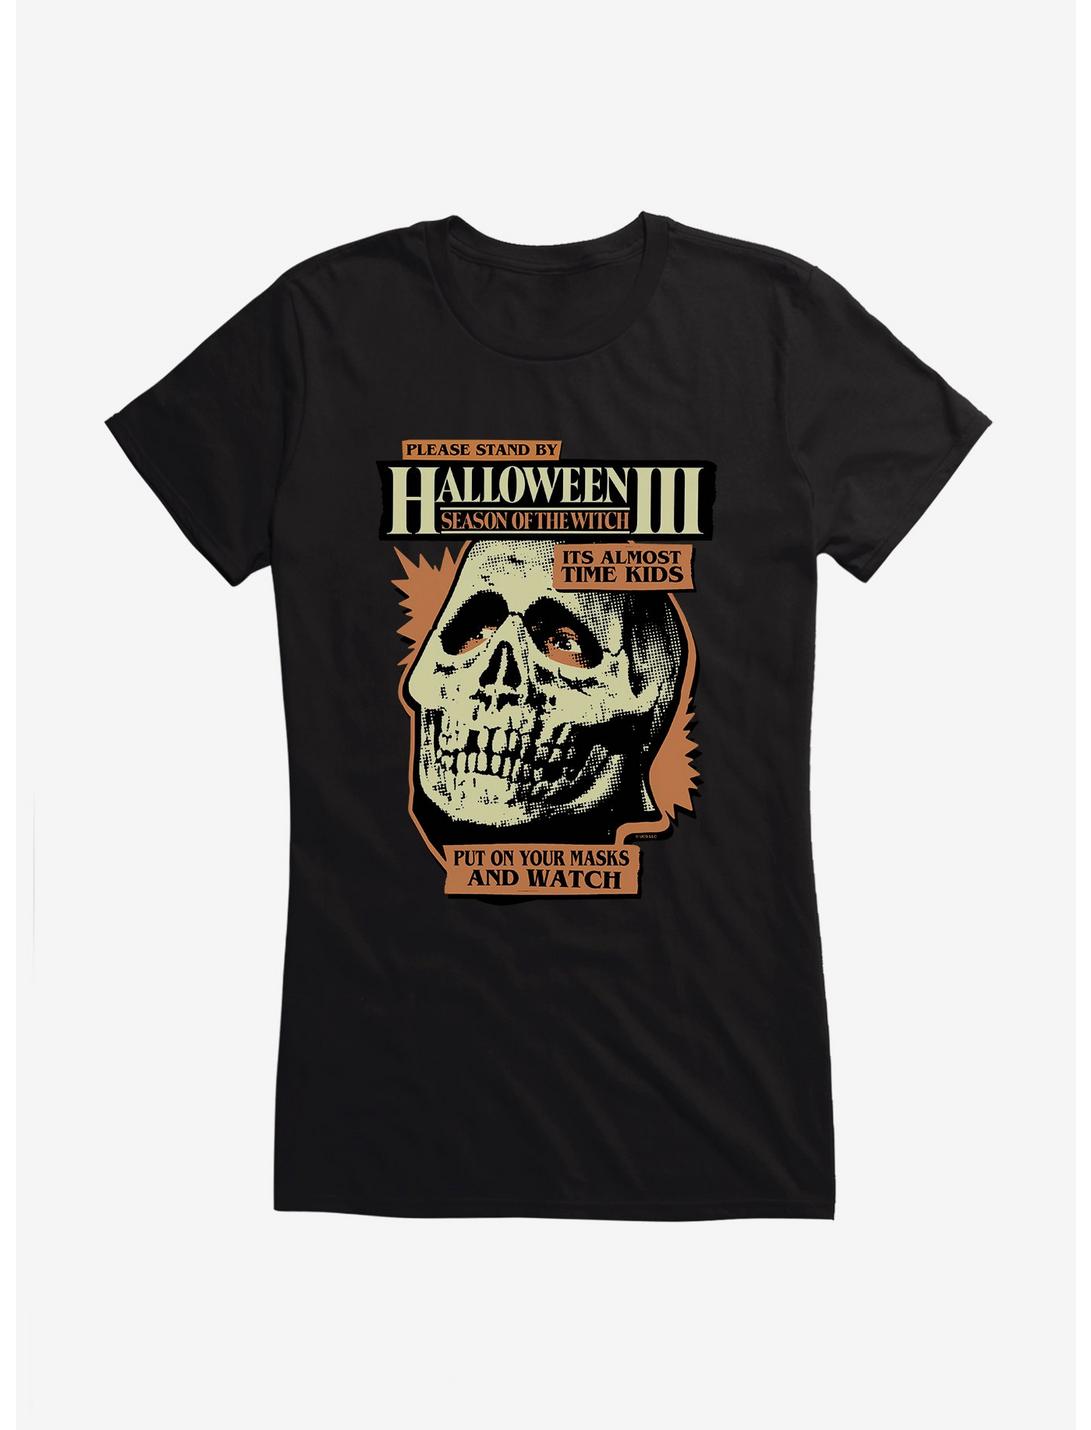 Halloween III: Season Of The Witch Please Stand By Girls T-Shirt, BLACK, hi-res